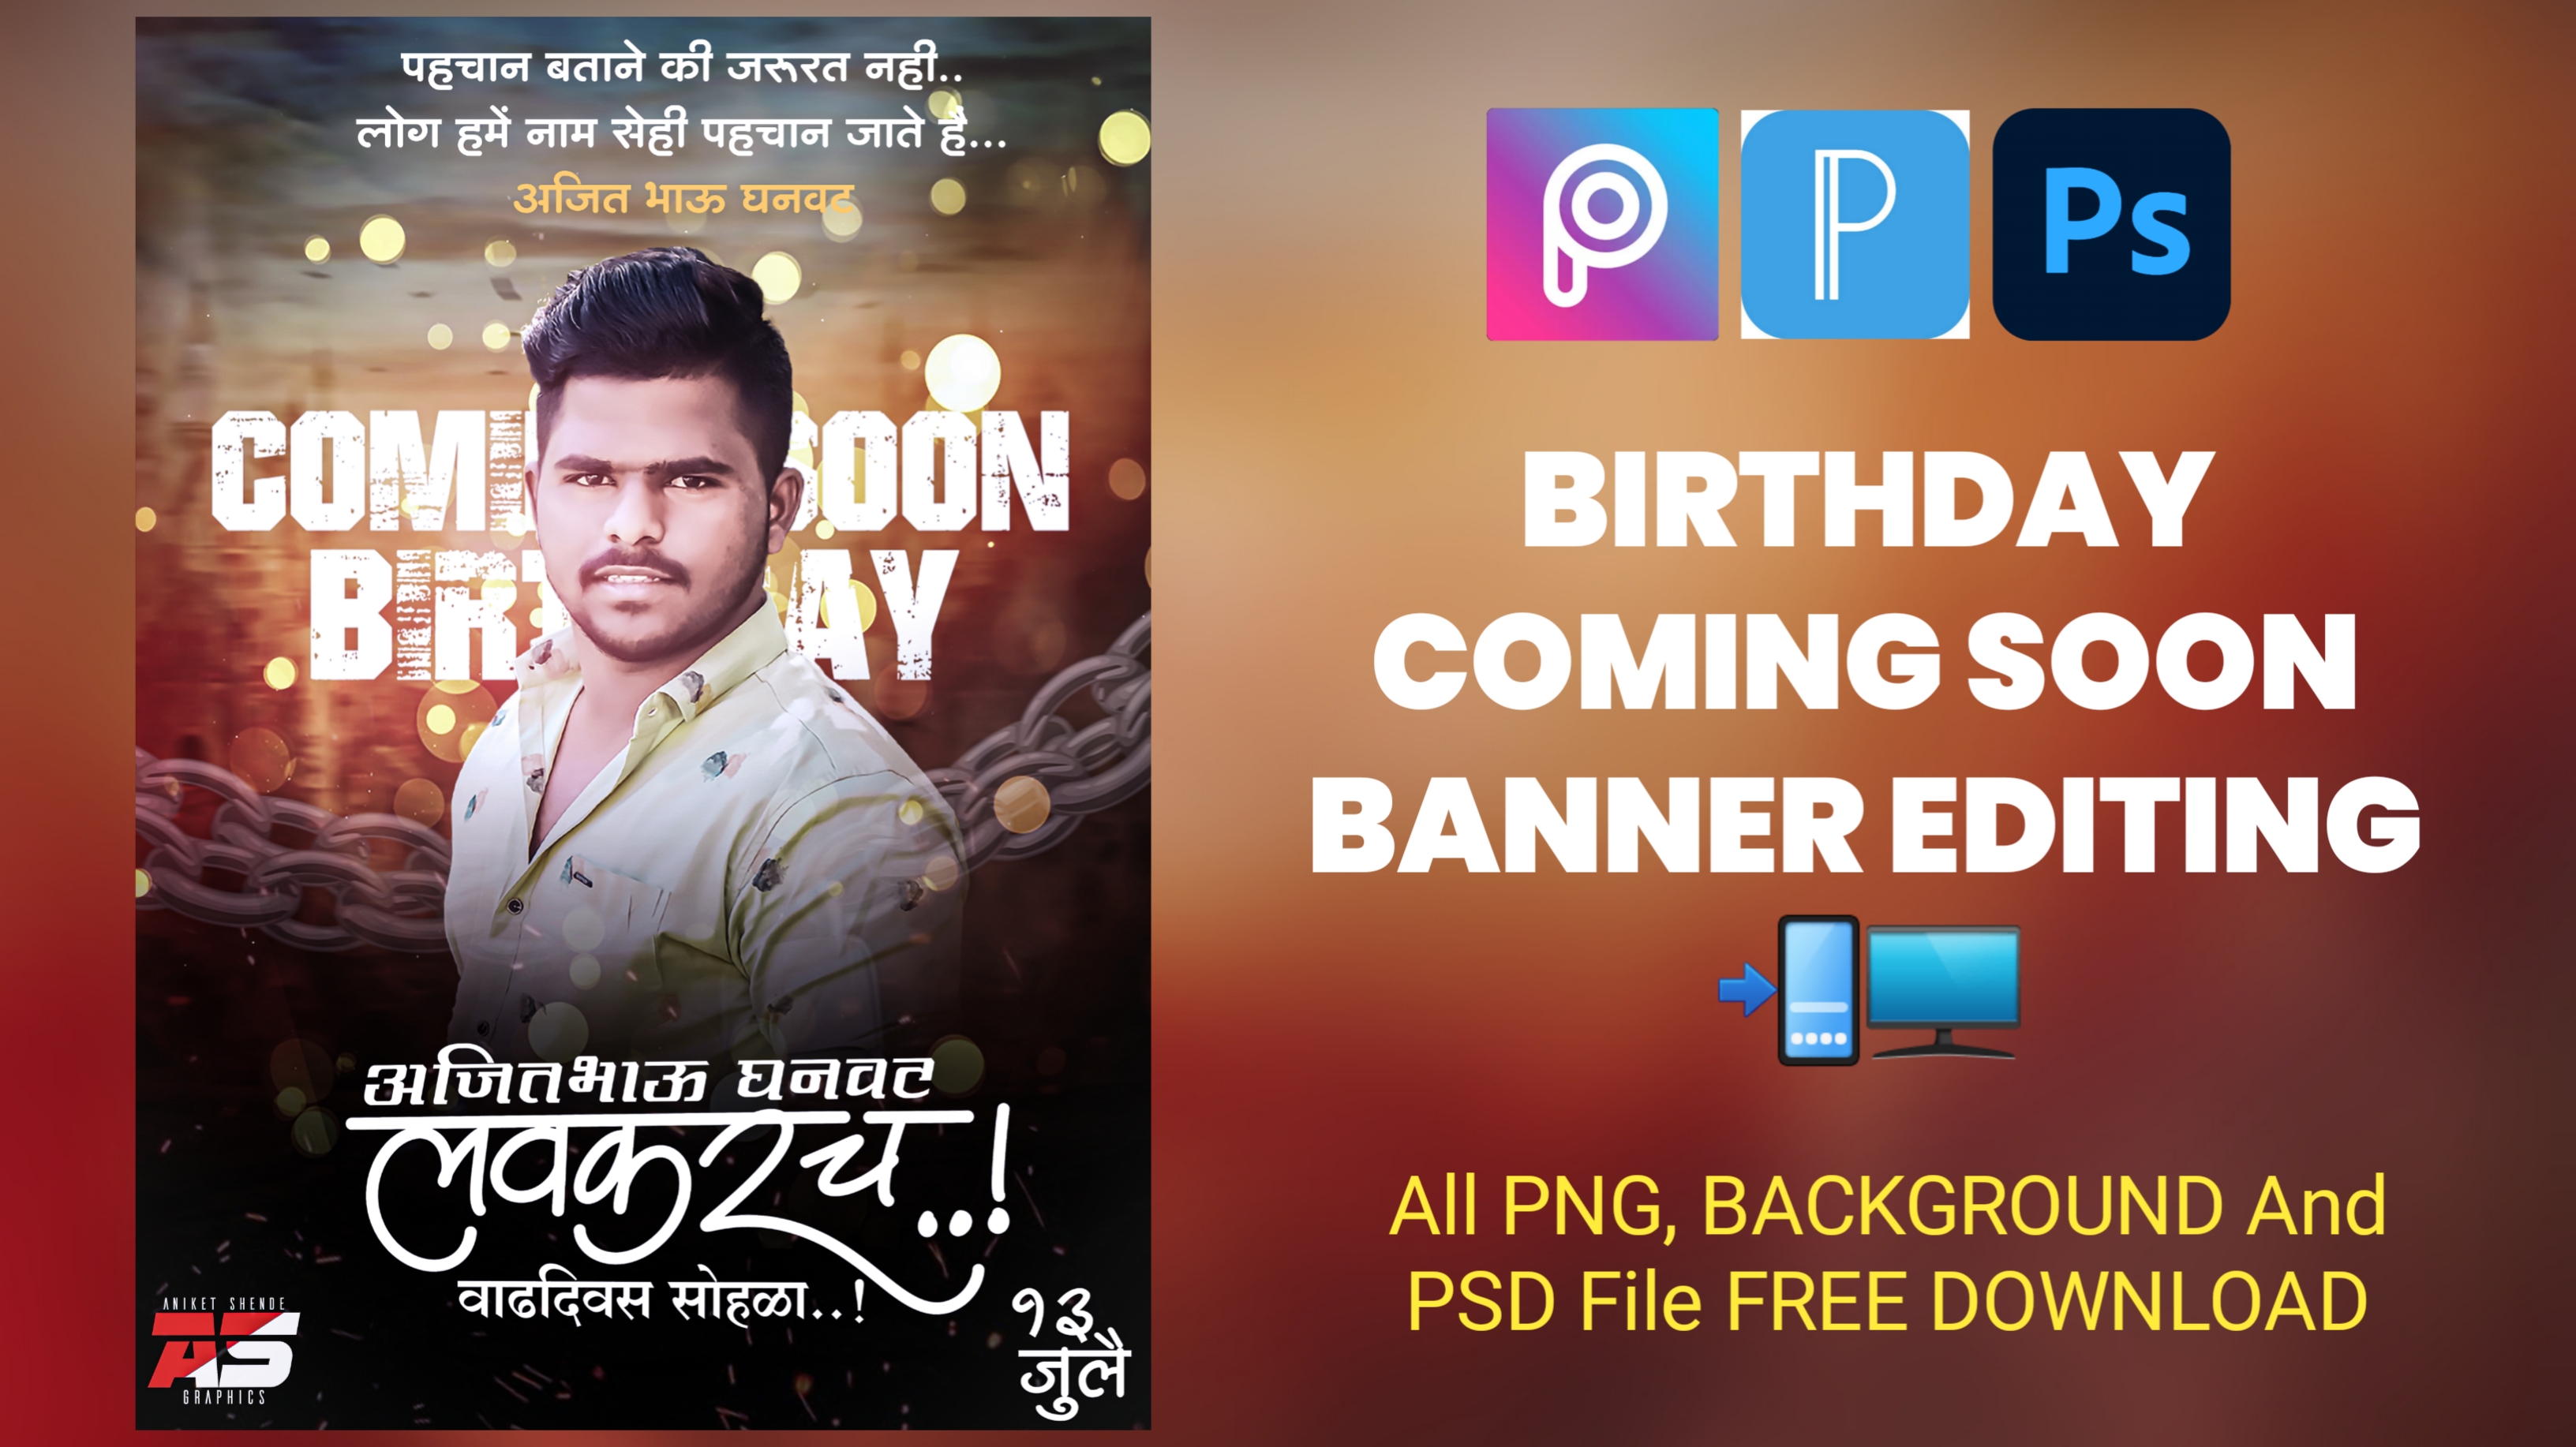 Happy Birthday coming soon banner Editing In Mobile 2022